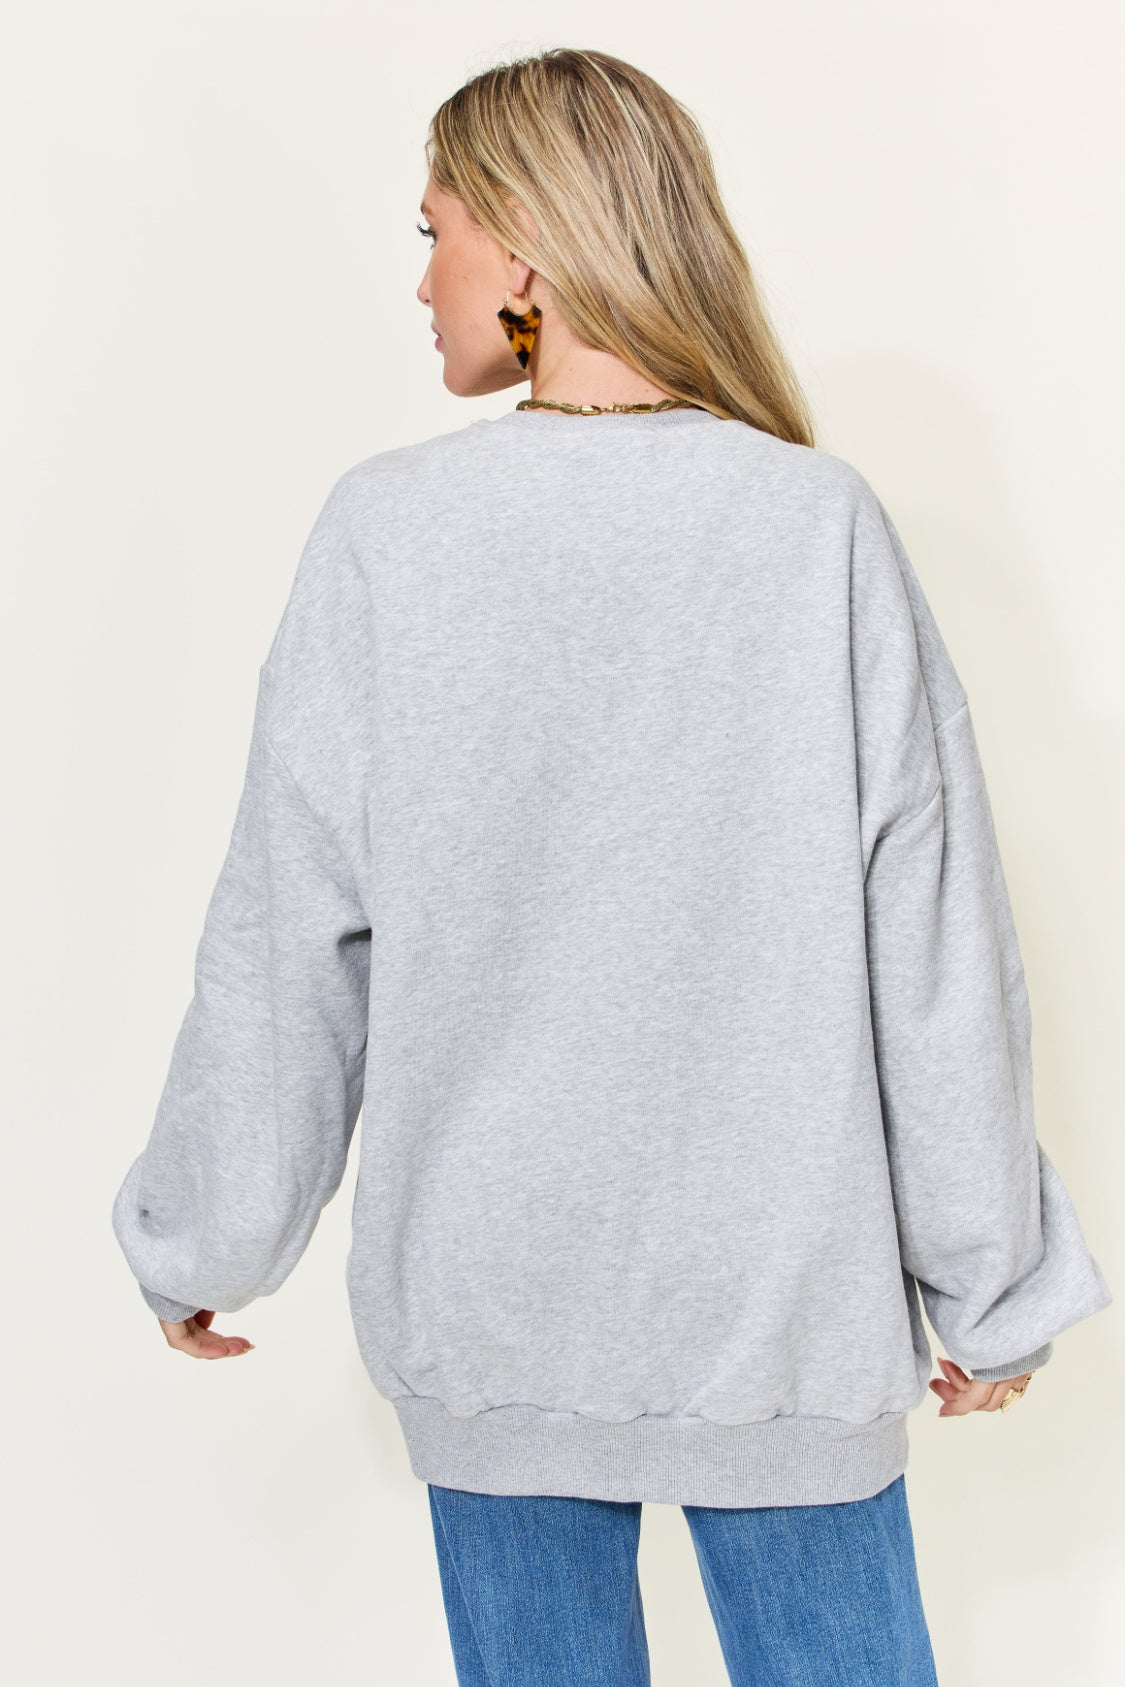 Simply Love Full Size YOU ARE ENOUGH Drop Shoulder Oversized Sweatshirt - Tigbuls Variety Fashion